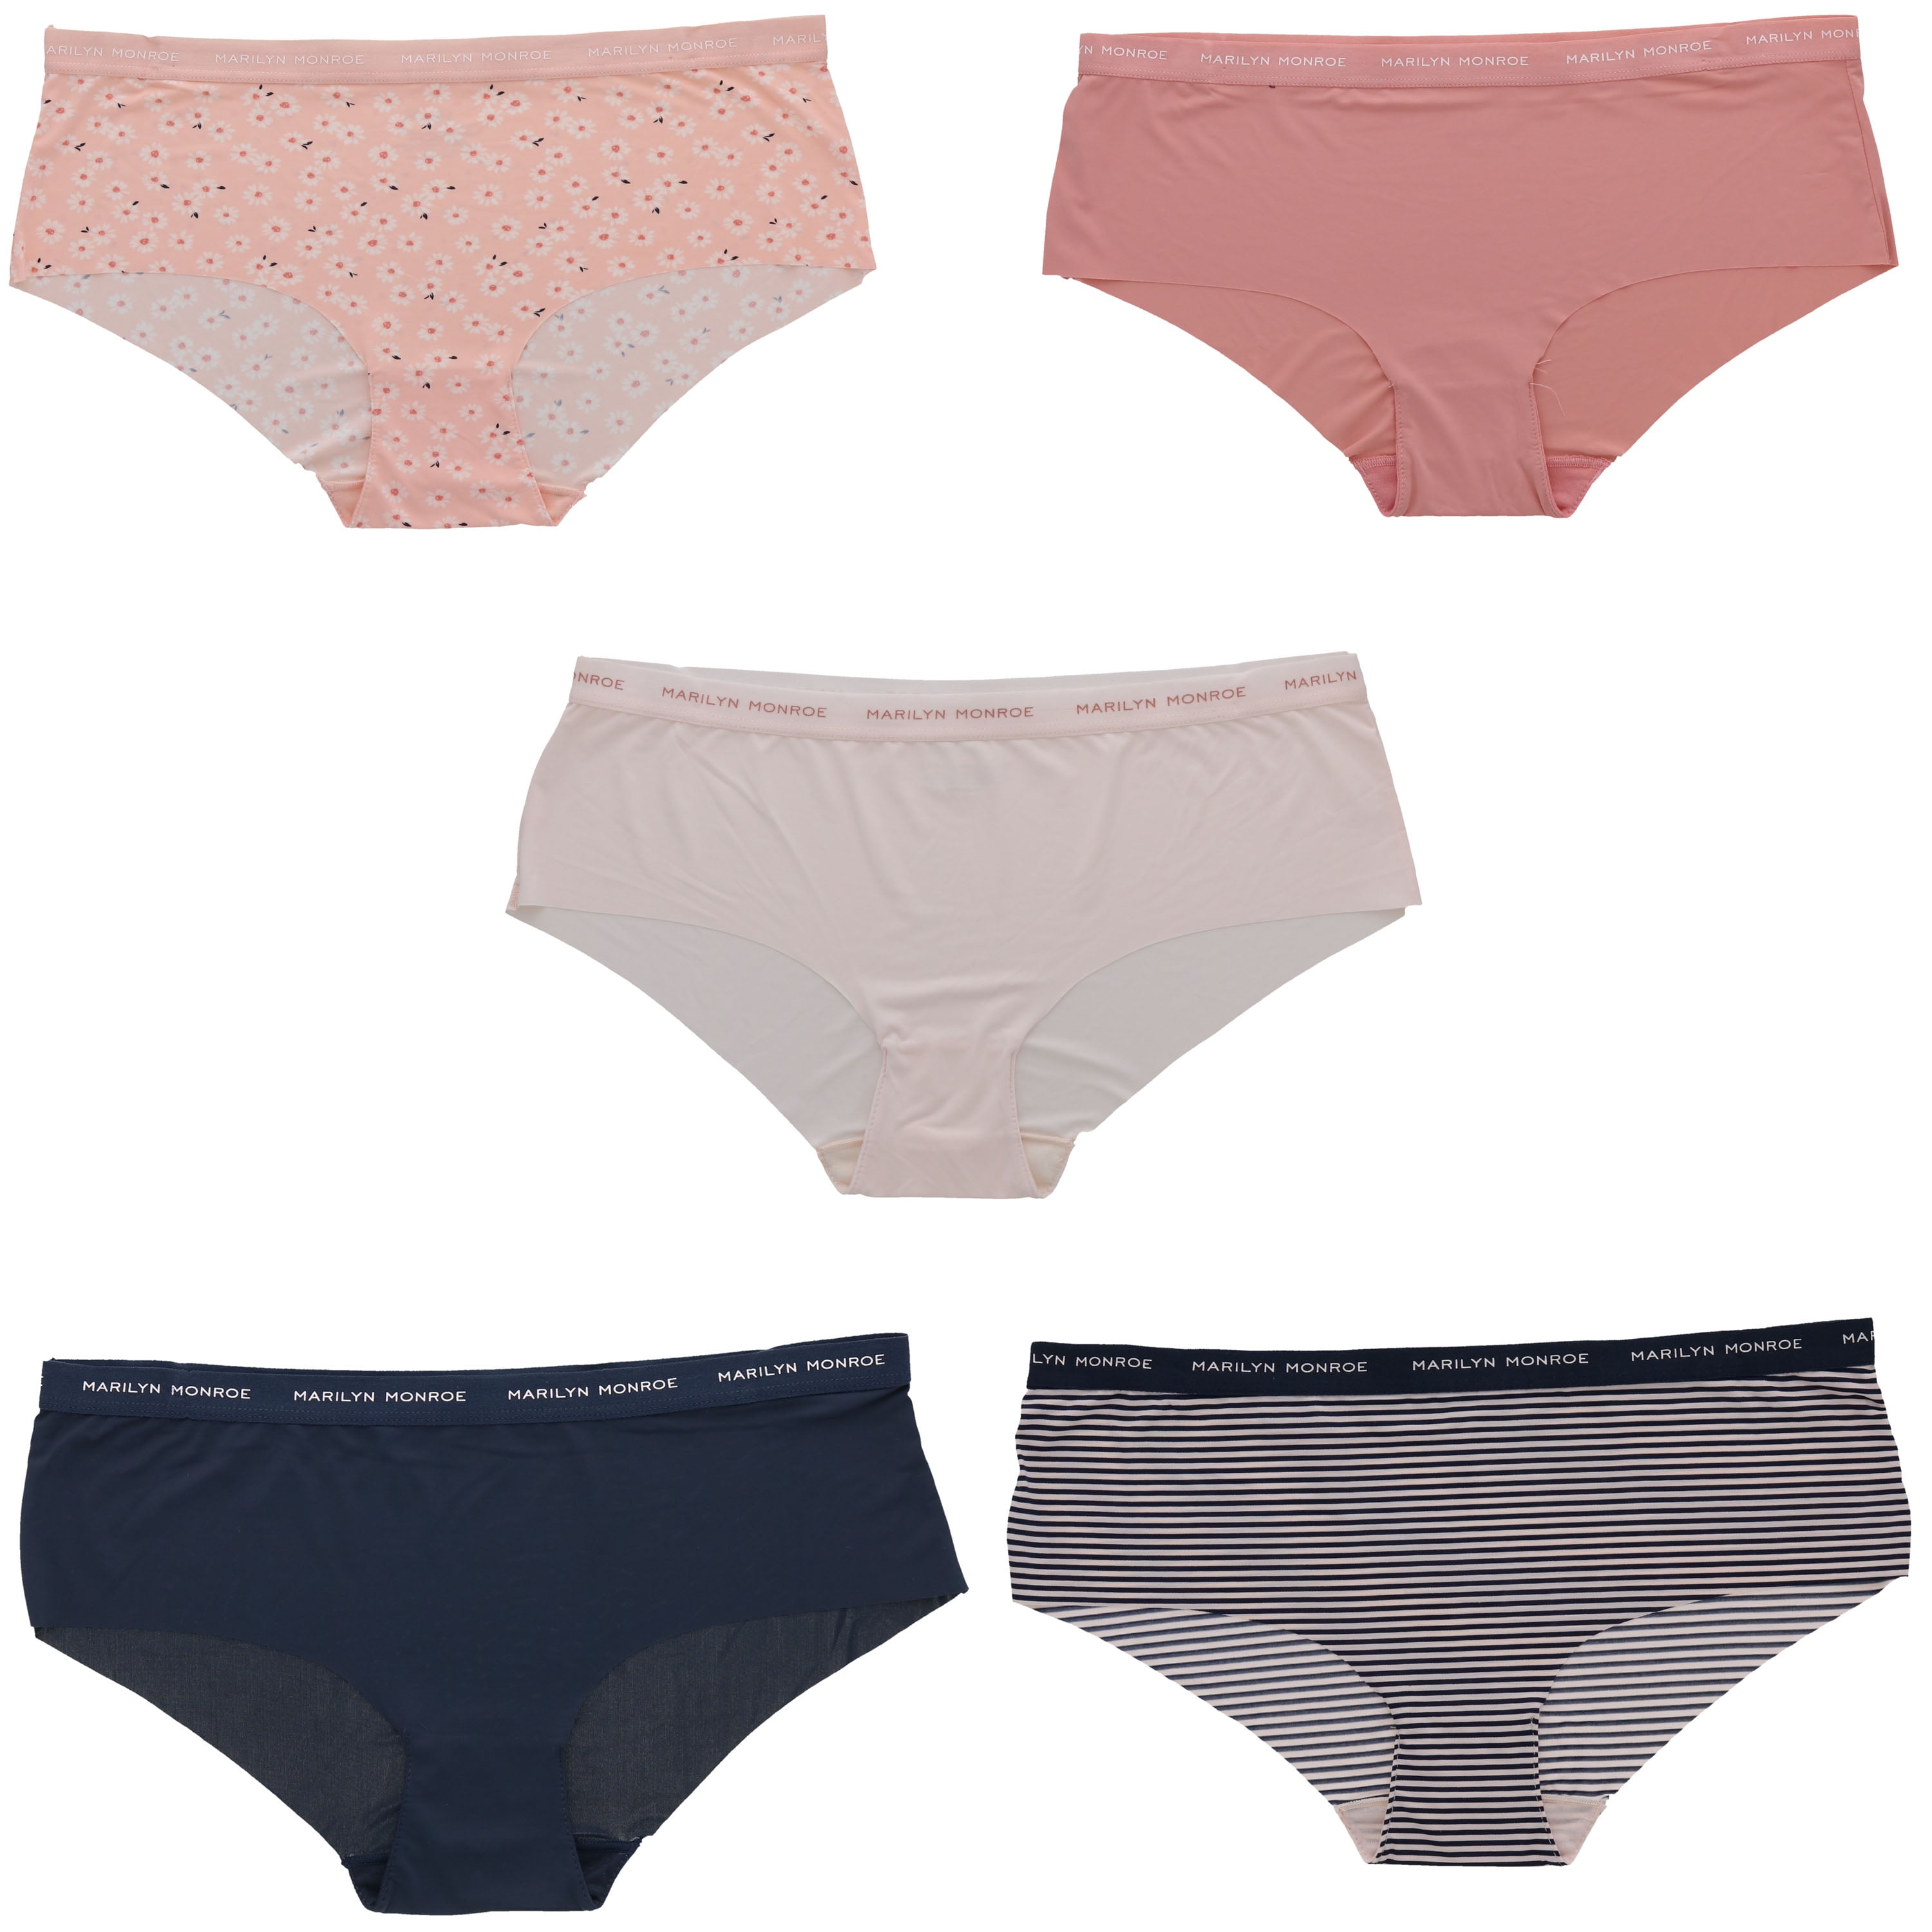 Marilyn Monroe Women's Seamless Sports Band Hipster Panties 5 Pack - Pink  Daisy & Navy Stripes - X-Large 